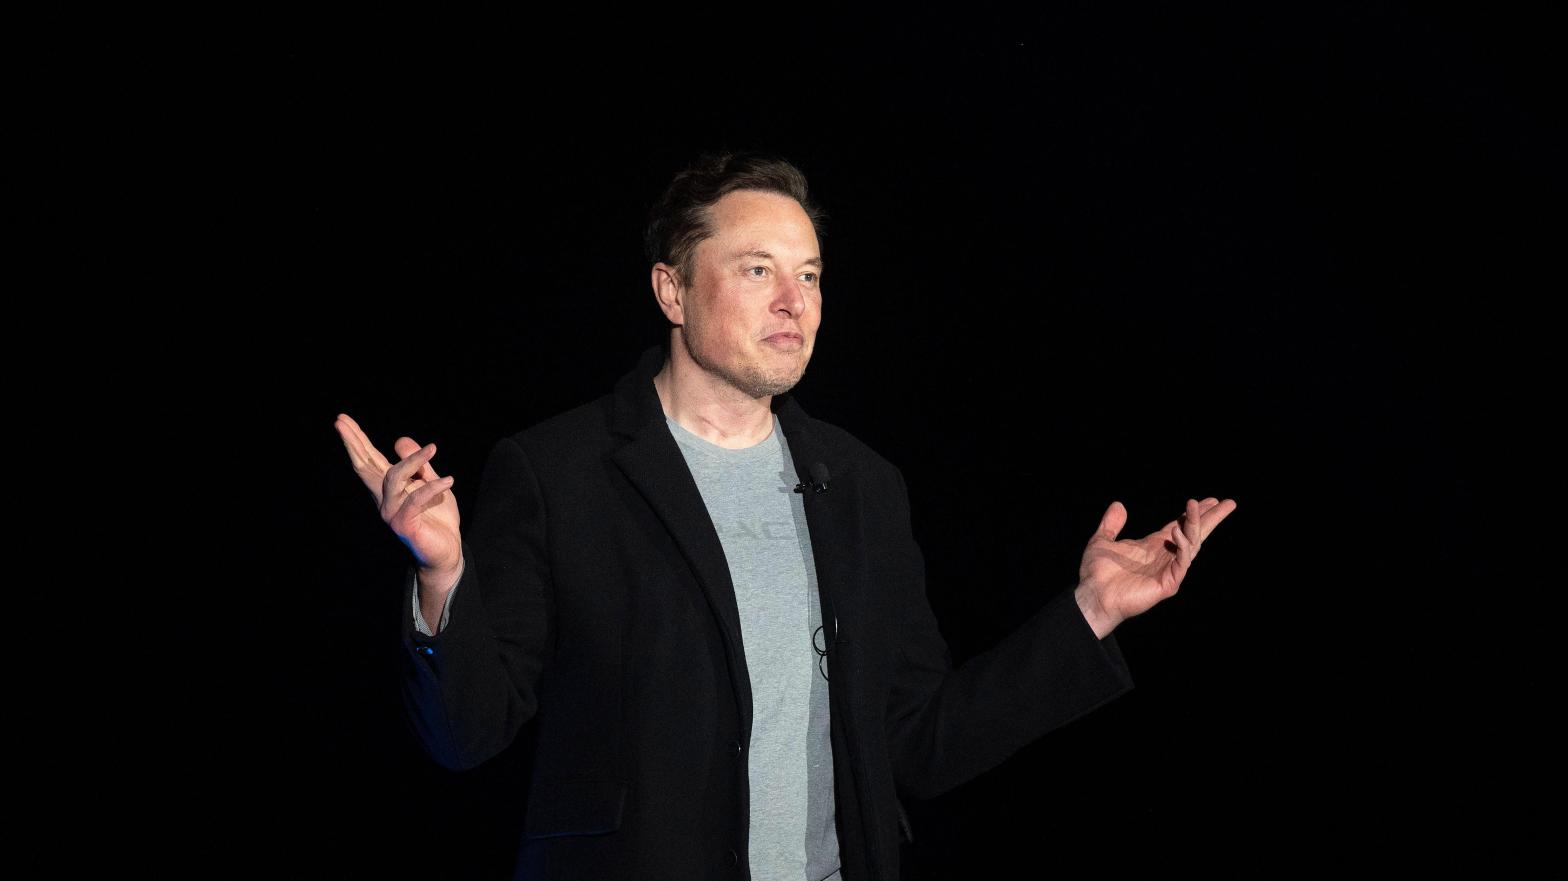 Elon Musk gestures as he speaks during a press conference at SpaceX's  Starbase facility near Boca Chica Village in South Texas on February 10,  2022.  (Photo: Jim Watson / AFP, Getty Images)